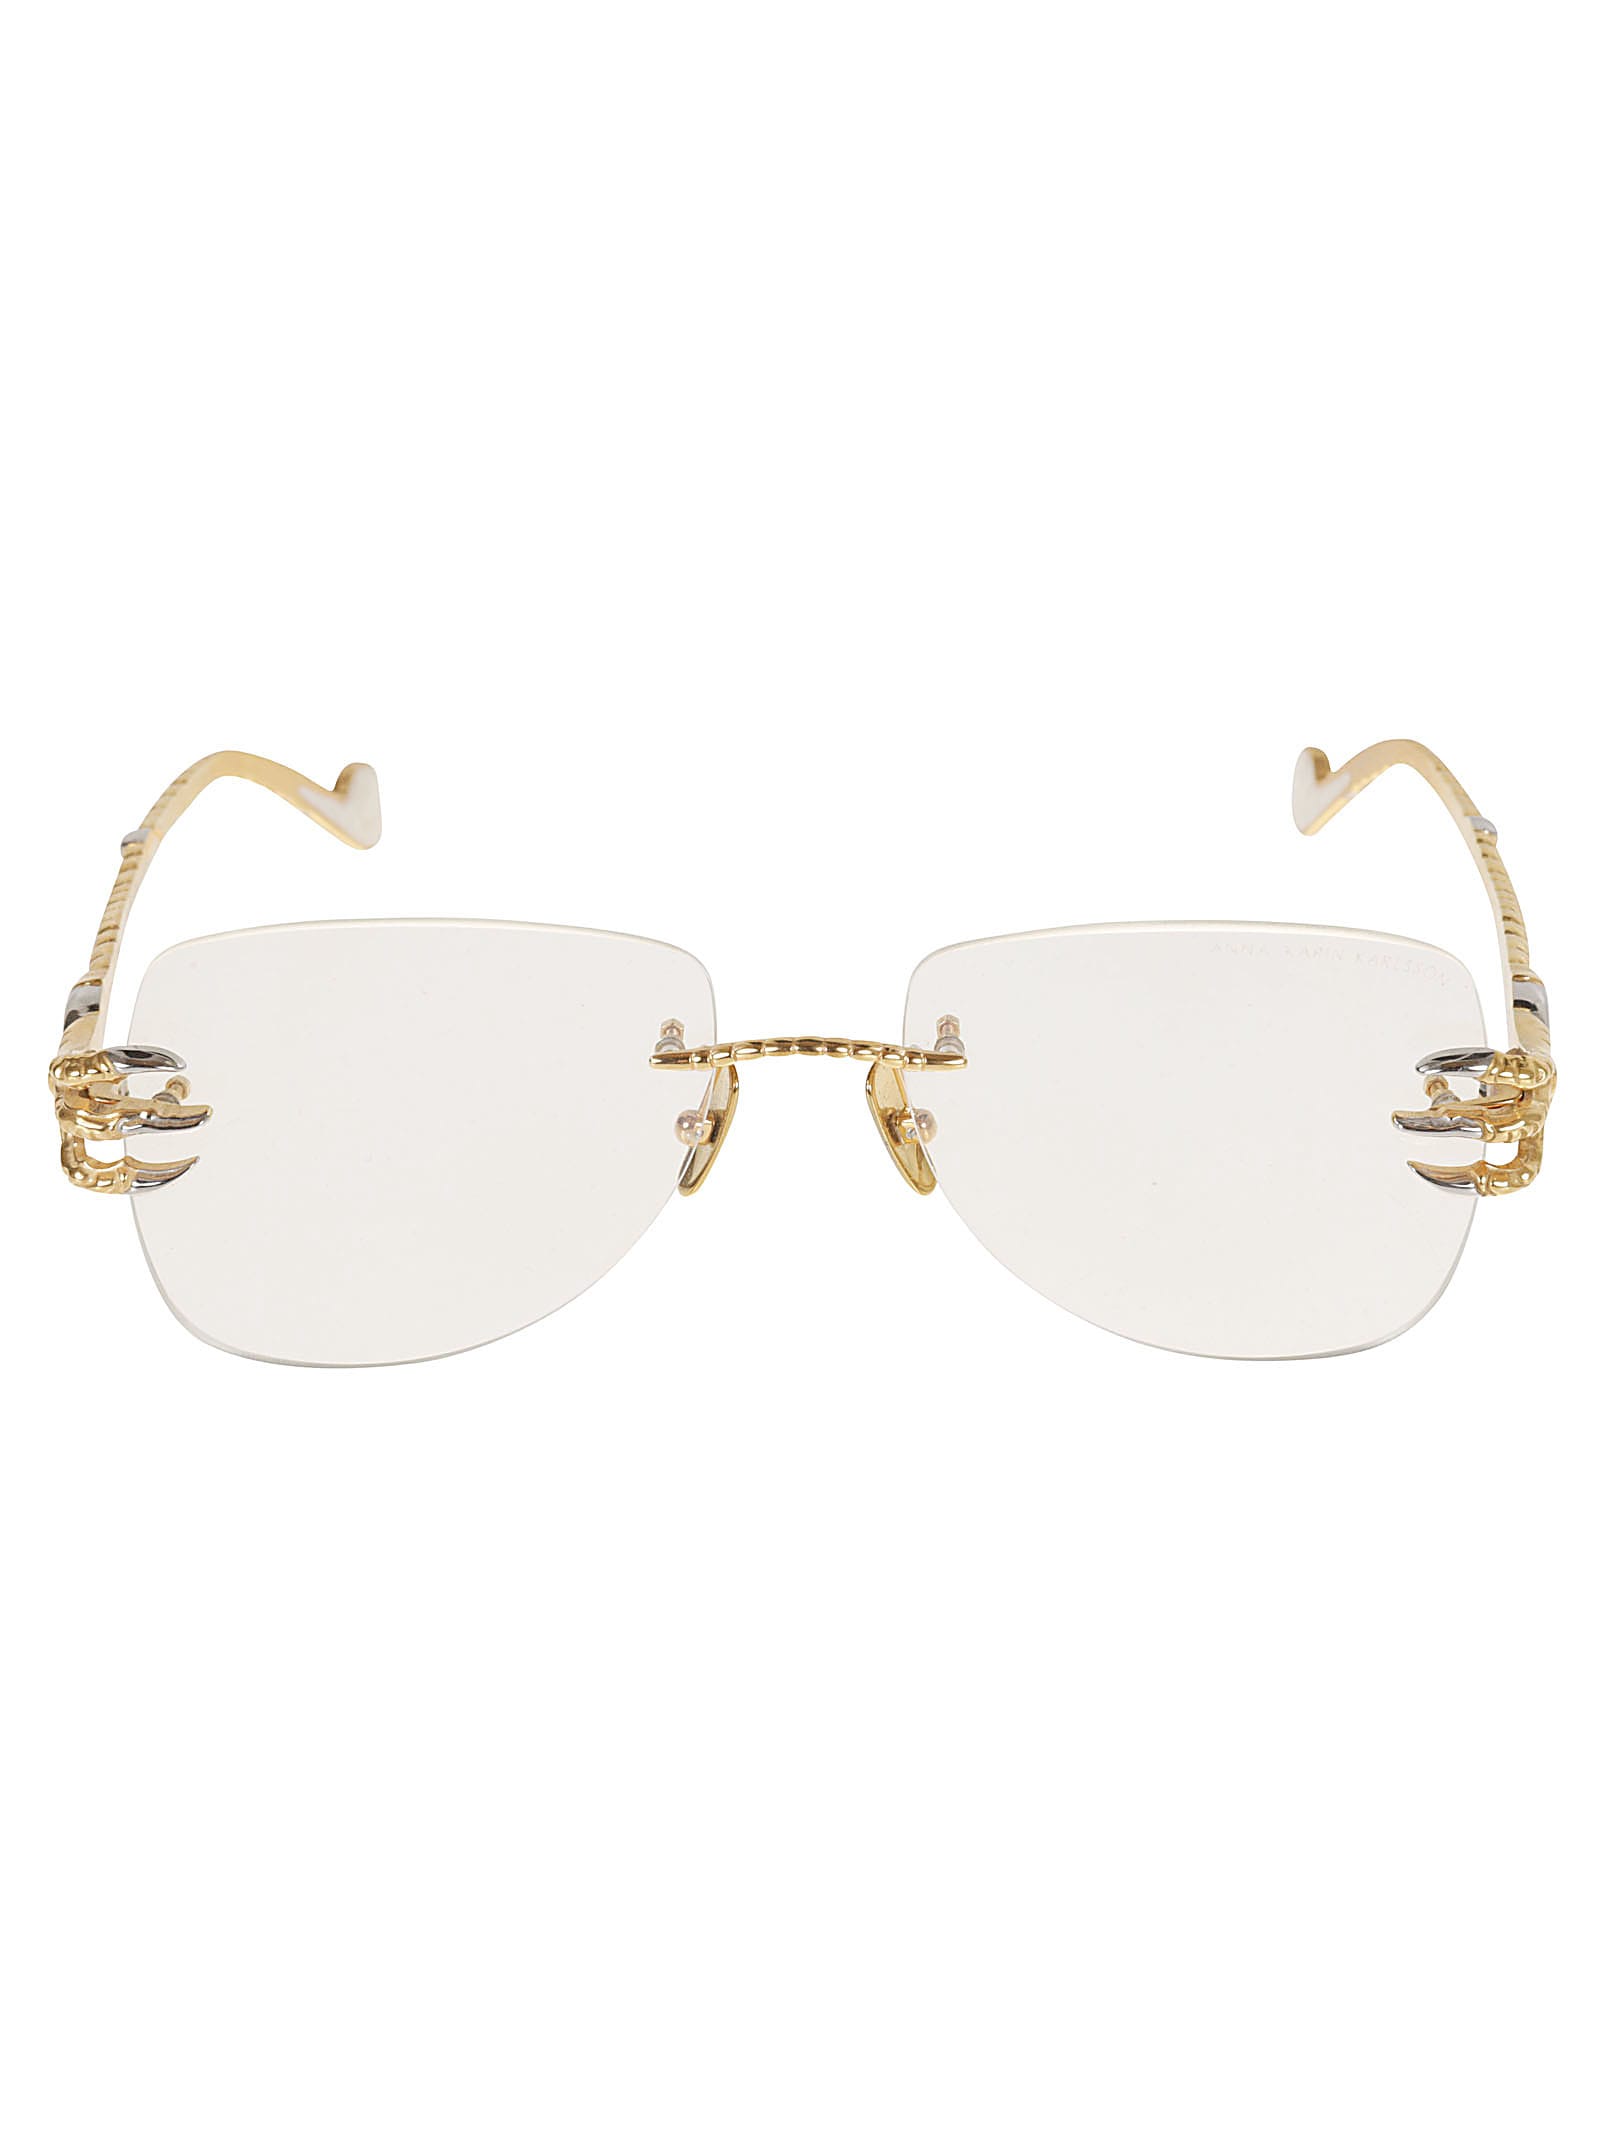 Anna-karin Karlsson The Claw & The Nest Sunglasses In Gold/black